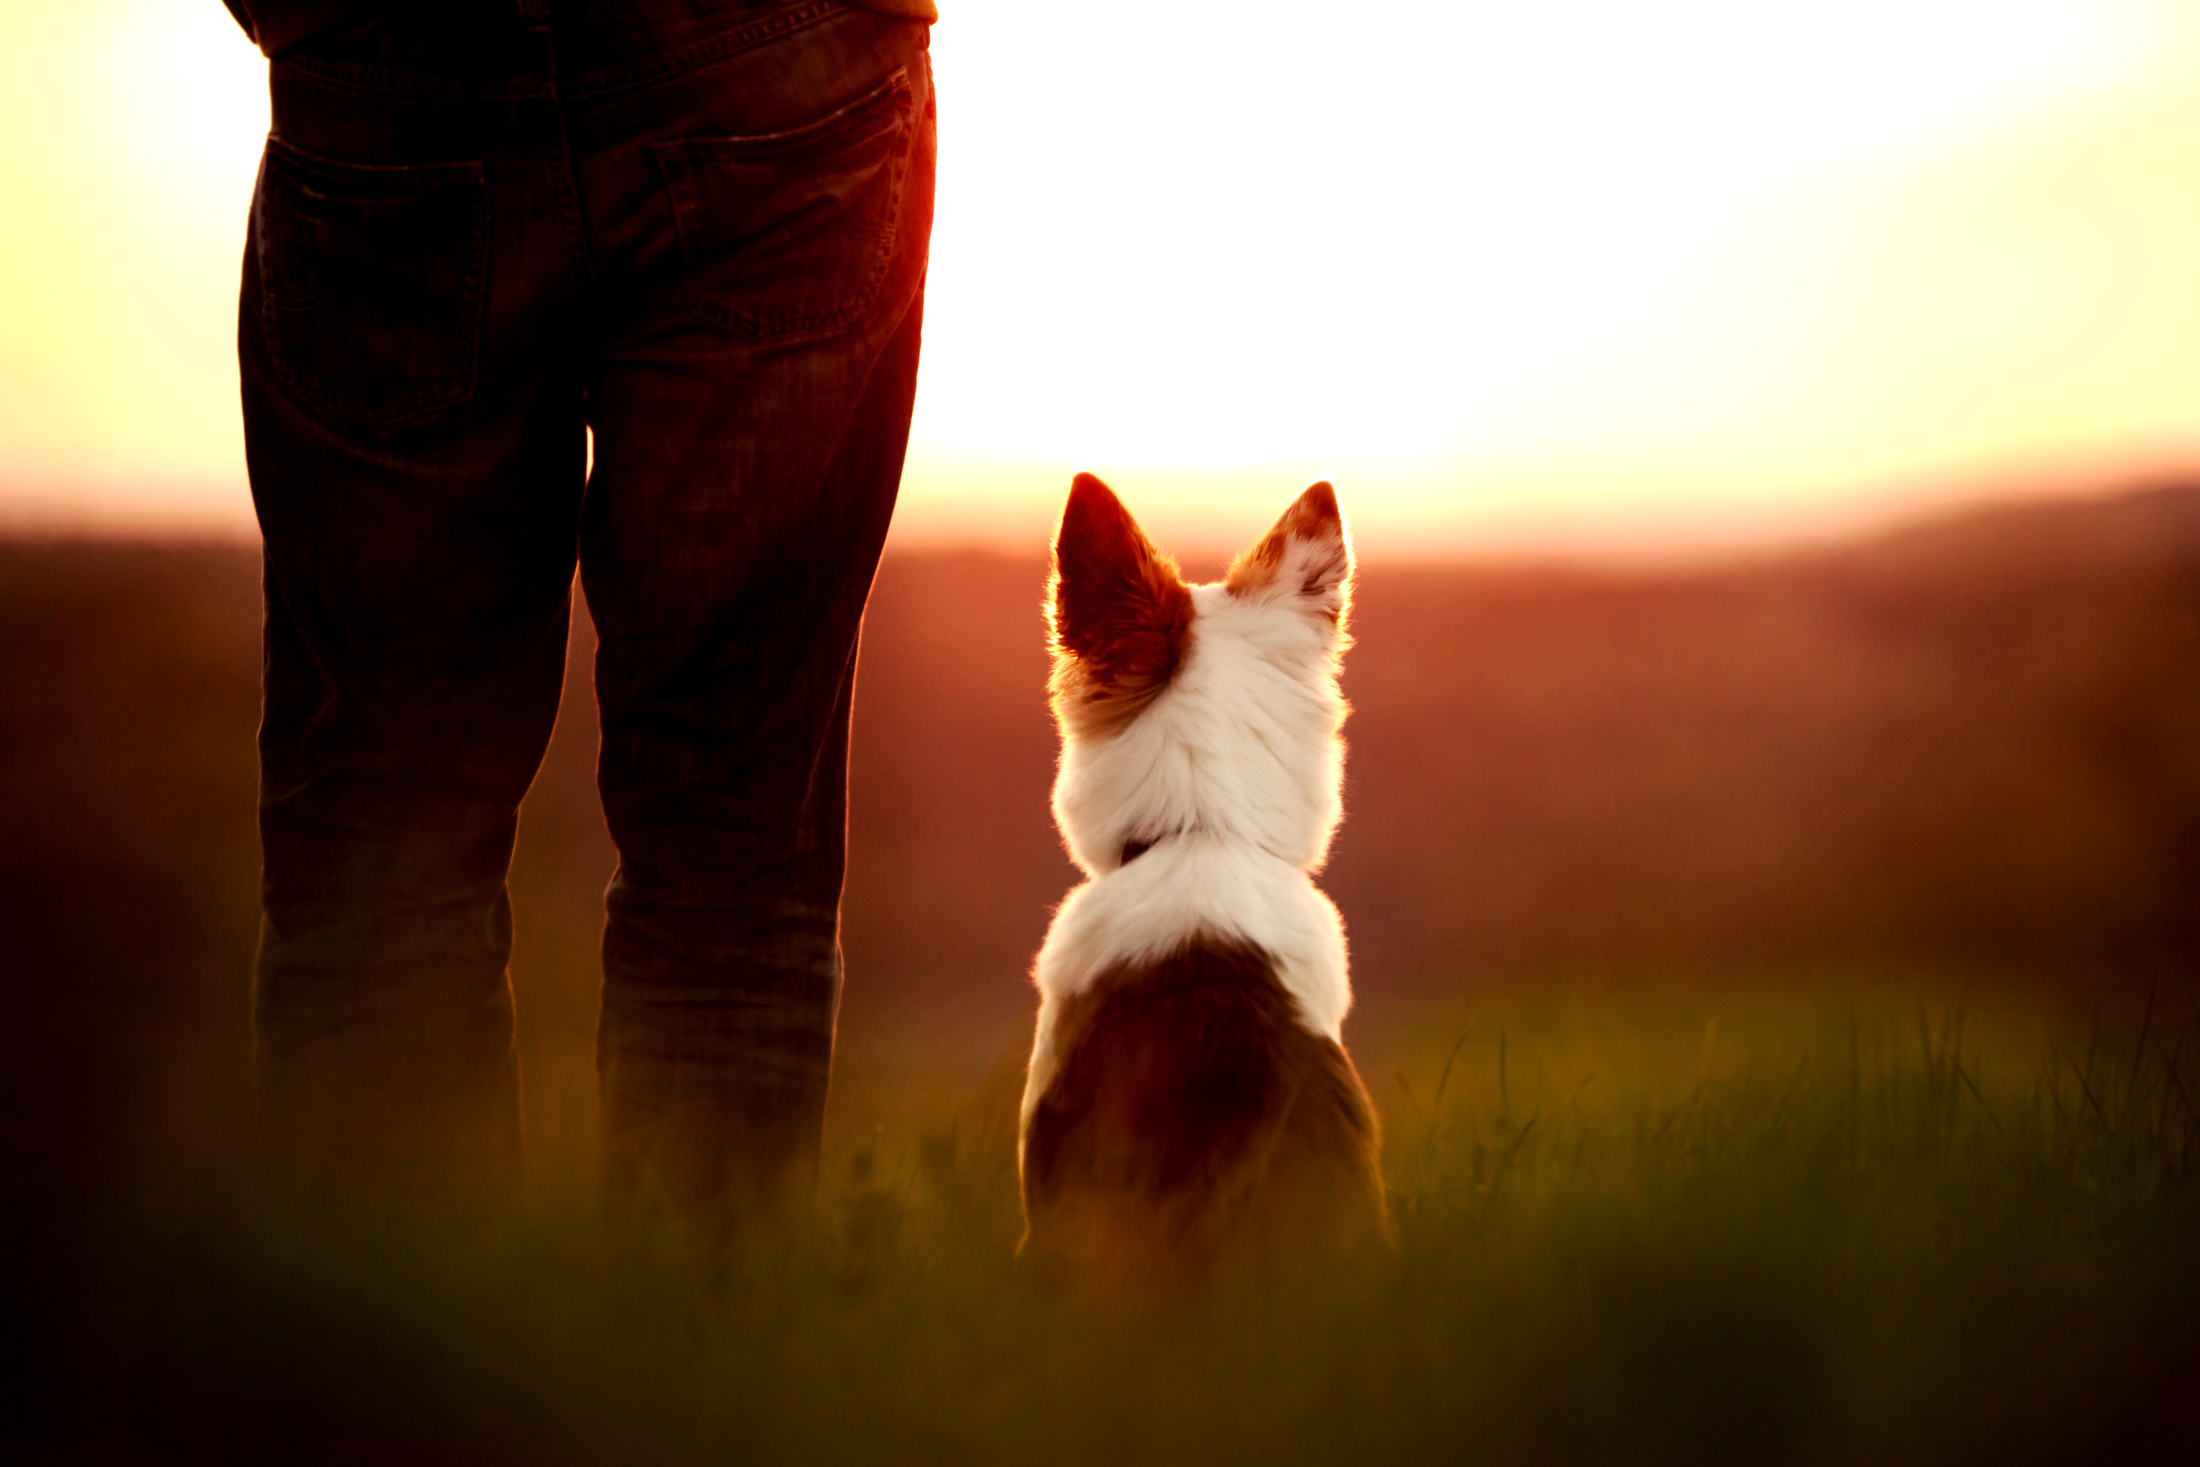 Dog and Owner Looking at the Sunset